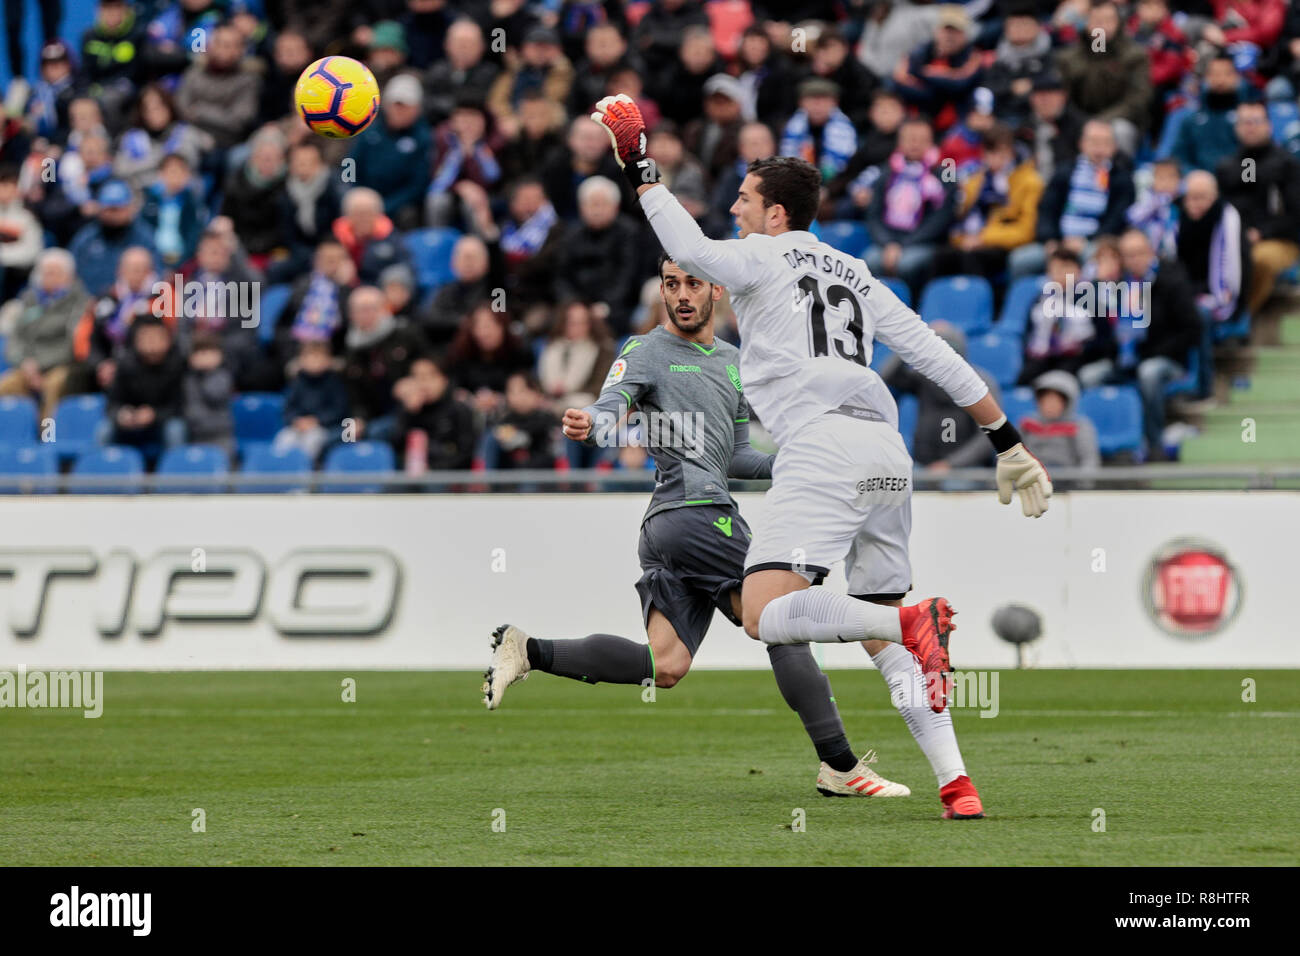 Getafe CF's David Soria and Real Sociedad's Juan Miguel Jimenez are seen in action during the La Liga football match between Getafe CF and Real Sociedad at the Coliseum Alfonso Perez in Getafe, Spain. ( Final score; Getafe CF 1:0 Real Sociedad ) Stock Photo